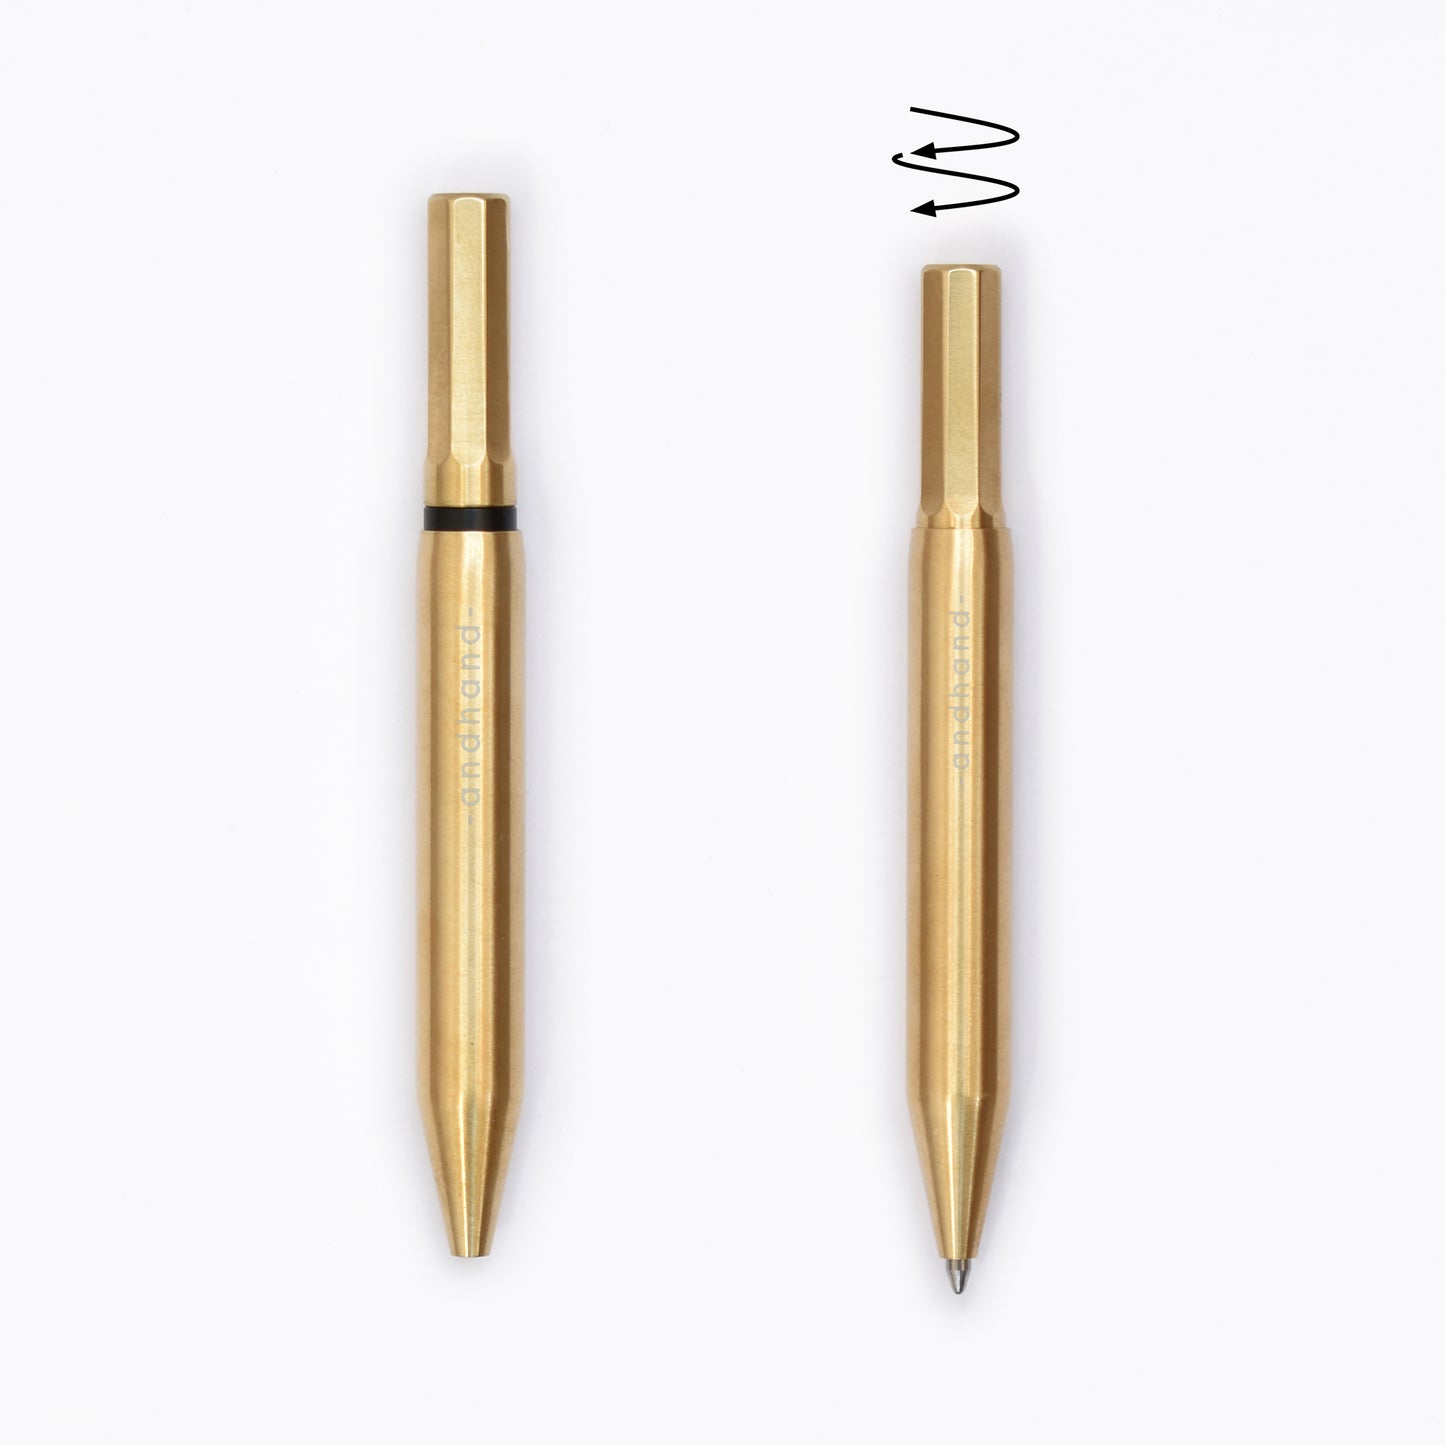 Method Pen Mini, solid brass mini 4 inch pen by Andhand